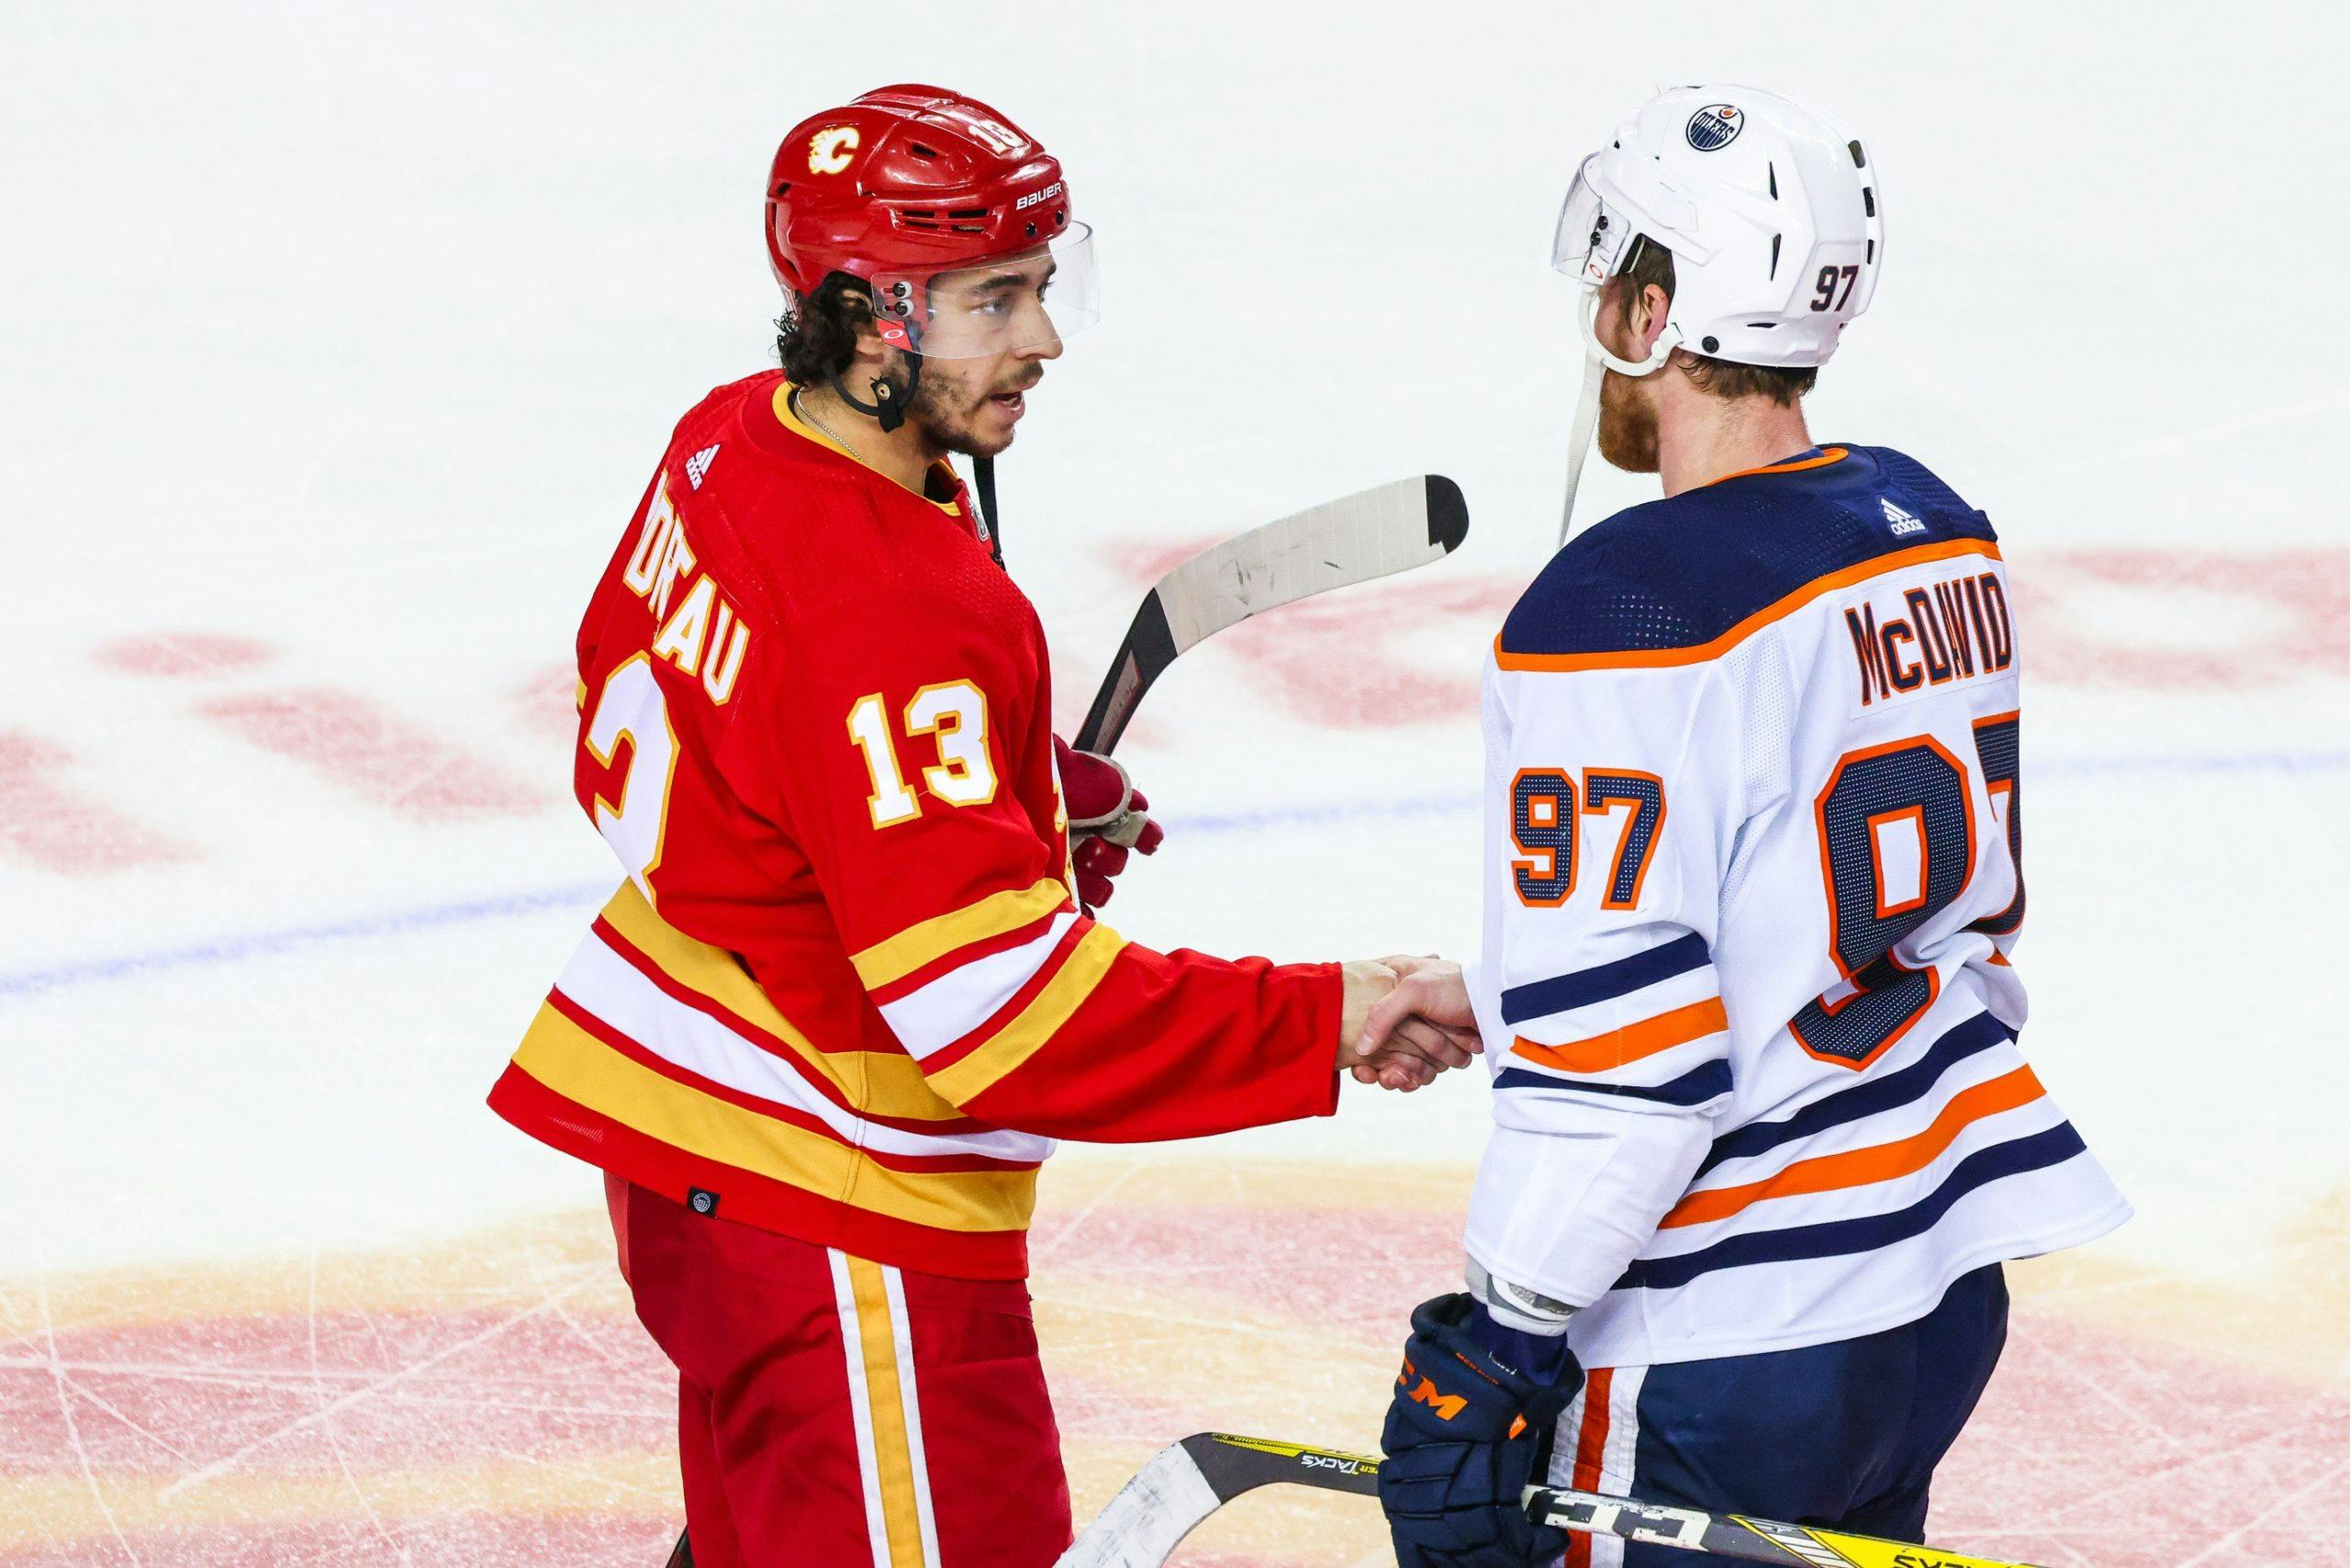 Playoff update: News on the Calgary Flames for May 4